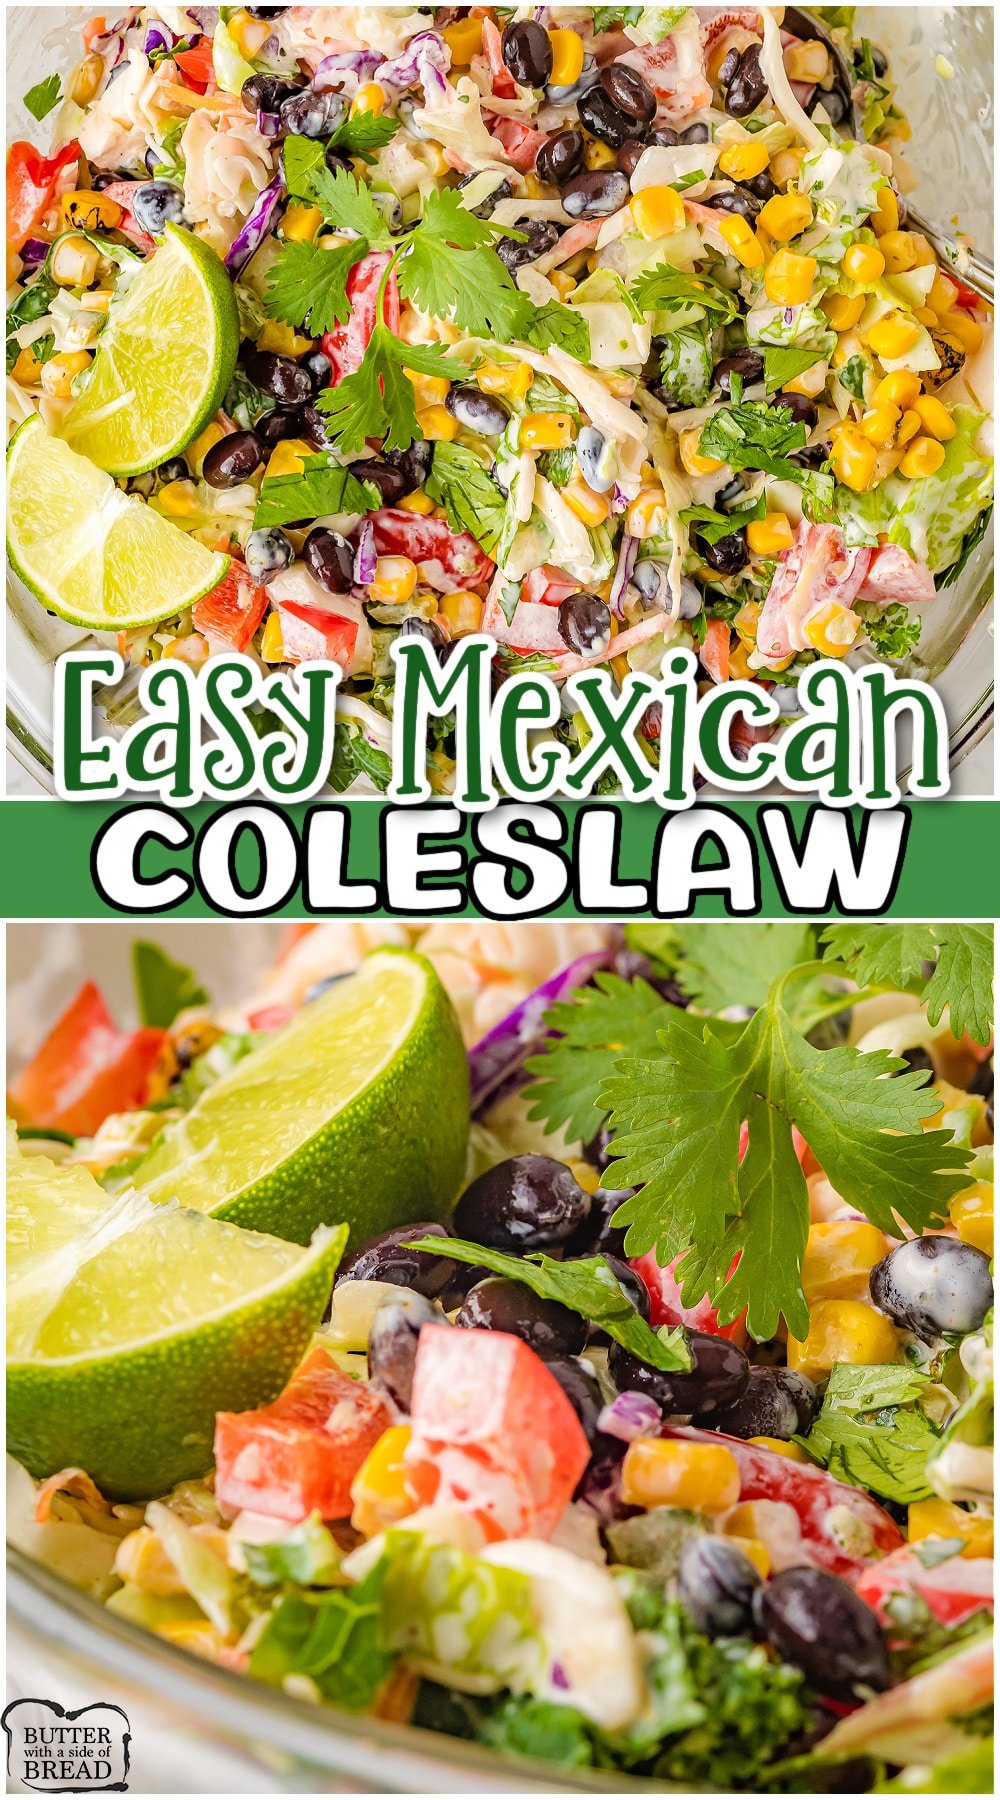 Mexican Coleslaw is a tasty twist on this classic side dish! Take your coleslaw up a notch by adding cilantro, corn, tomatoes, beans, jalapeno, and a great citrus dressing!